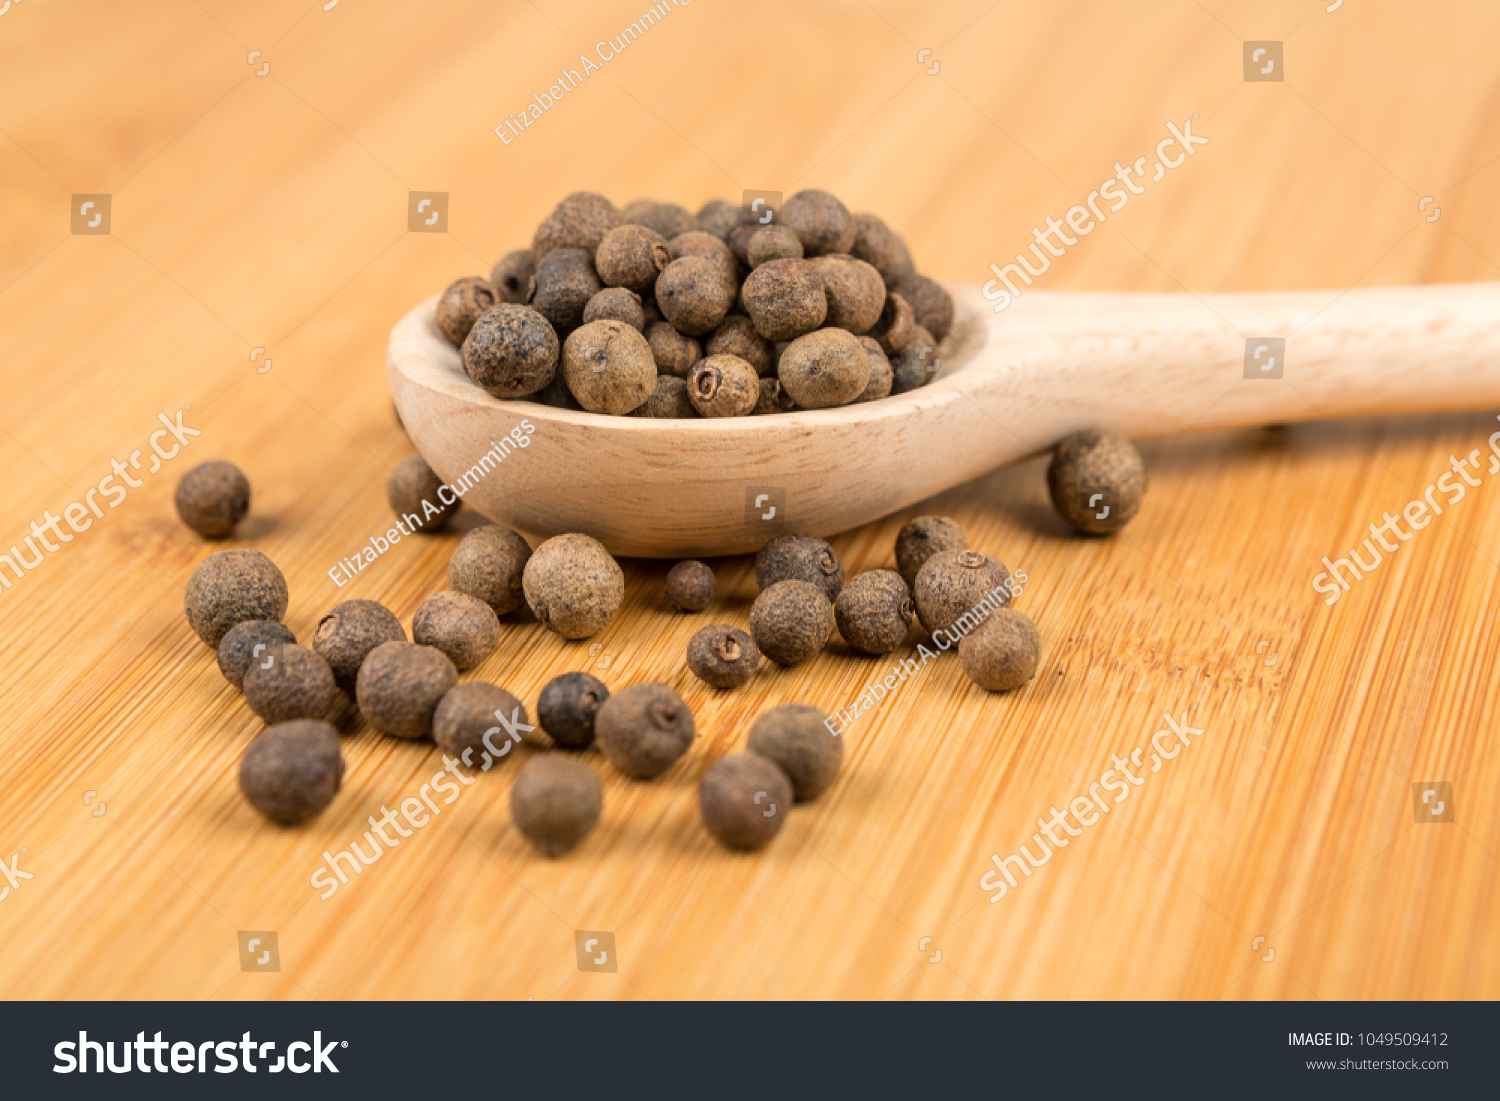 Dried whole allspice on a wood background #1049509412